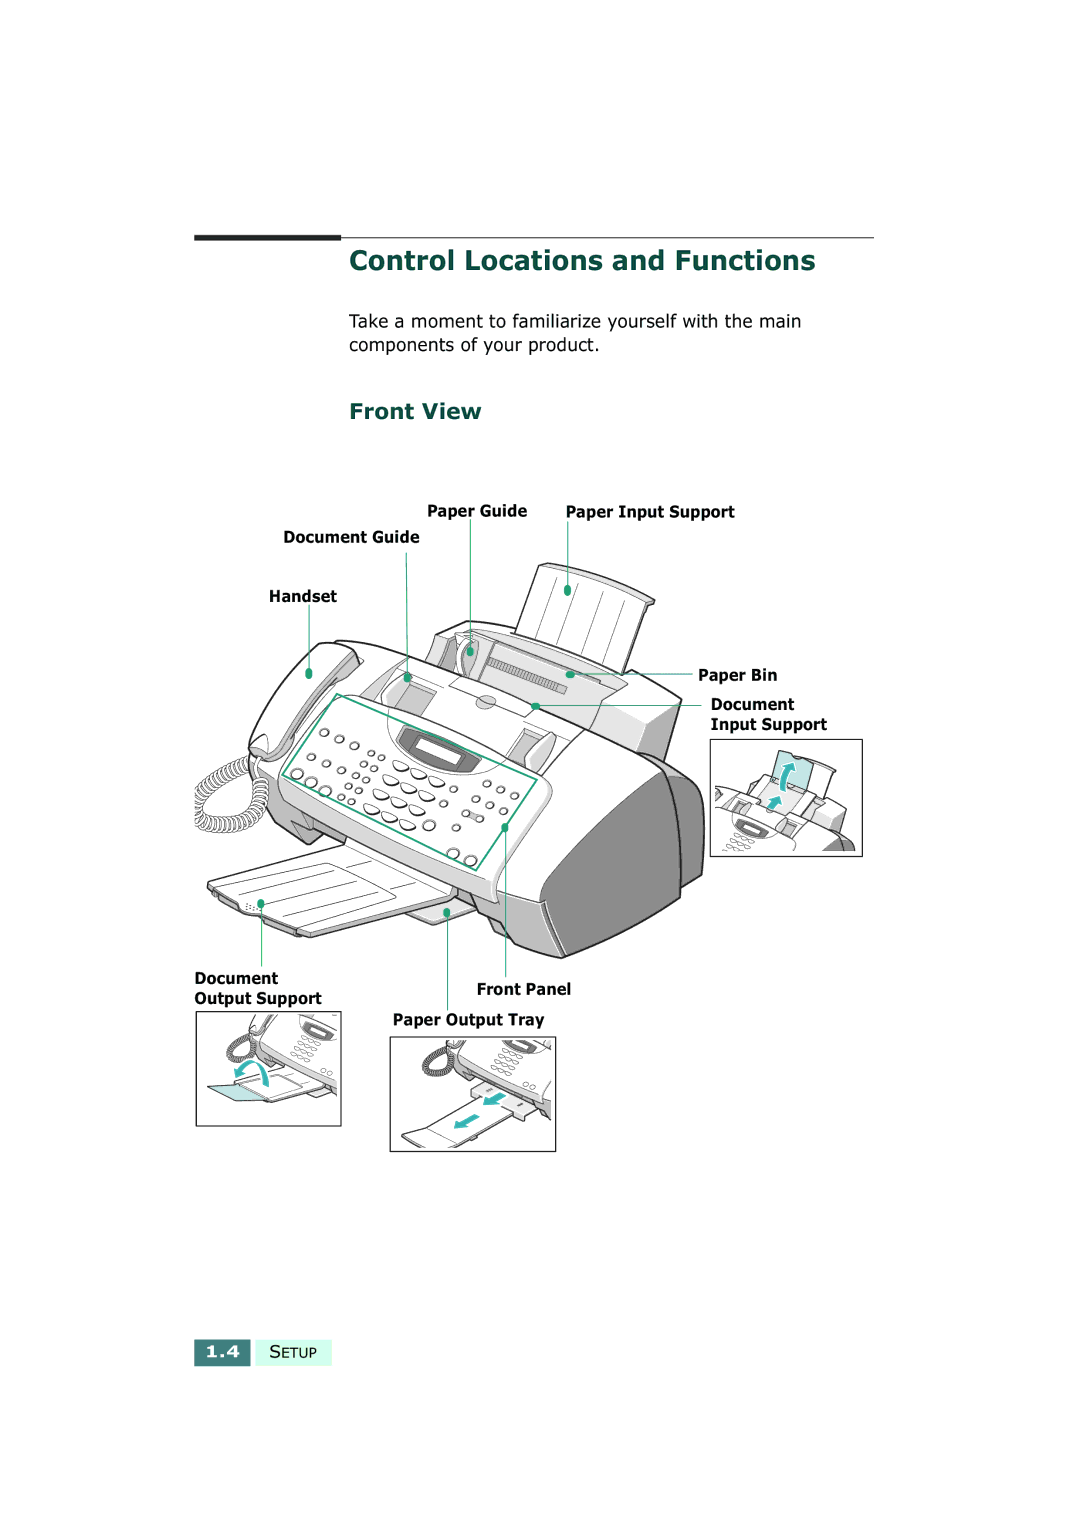 Samsung SF-430 manual Control Locations and Functions, Front View 